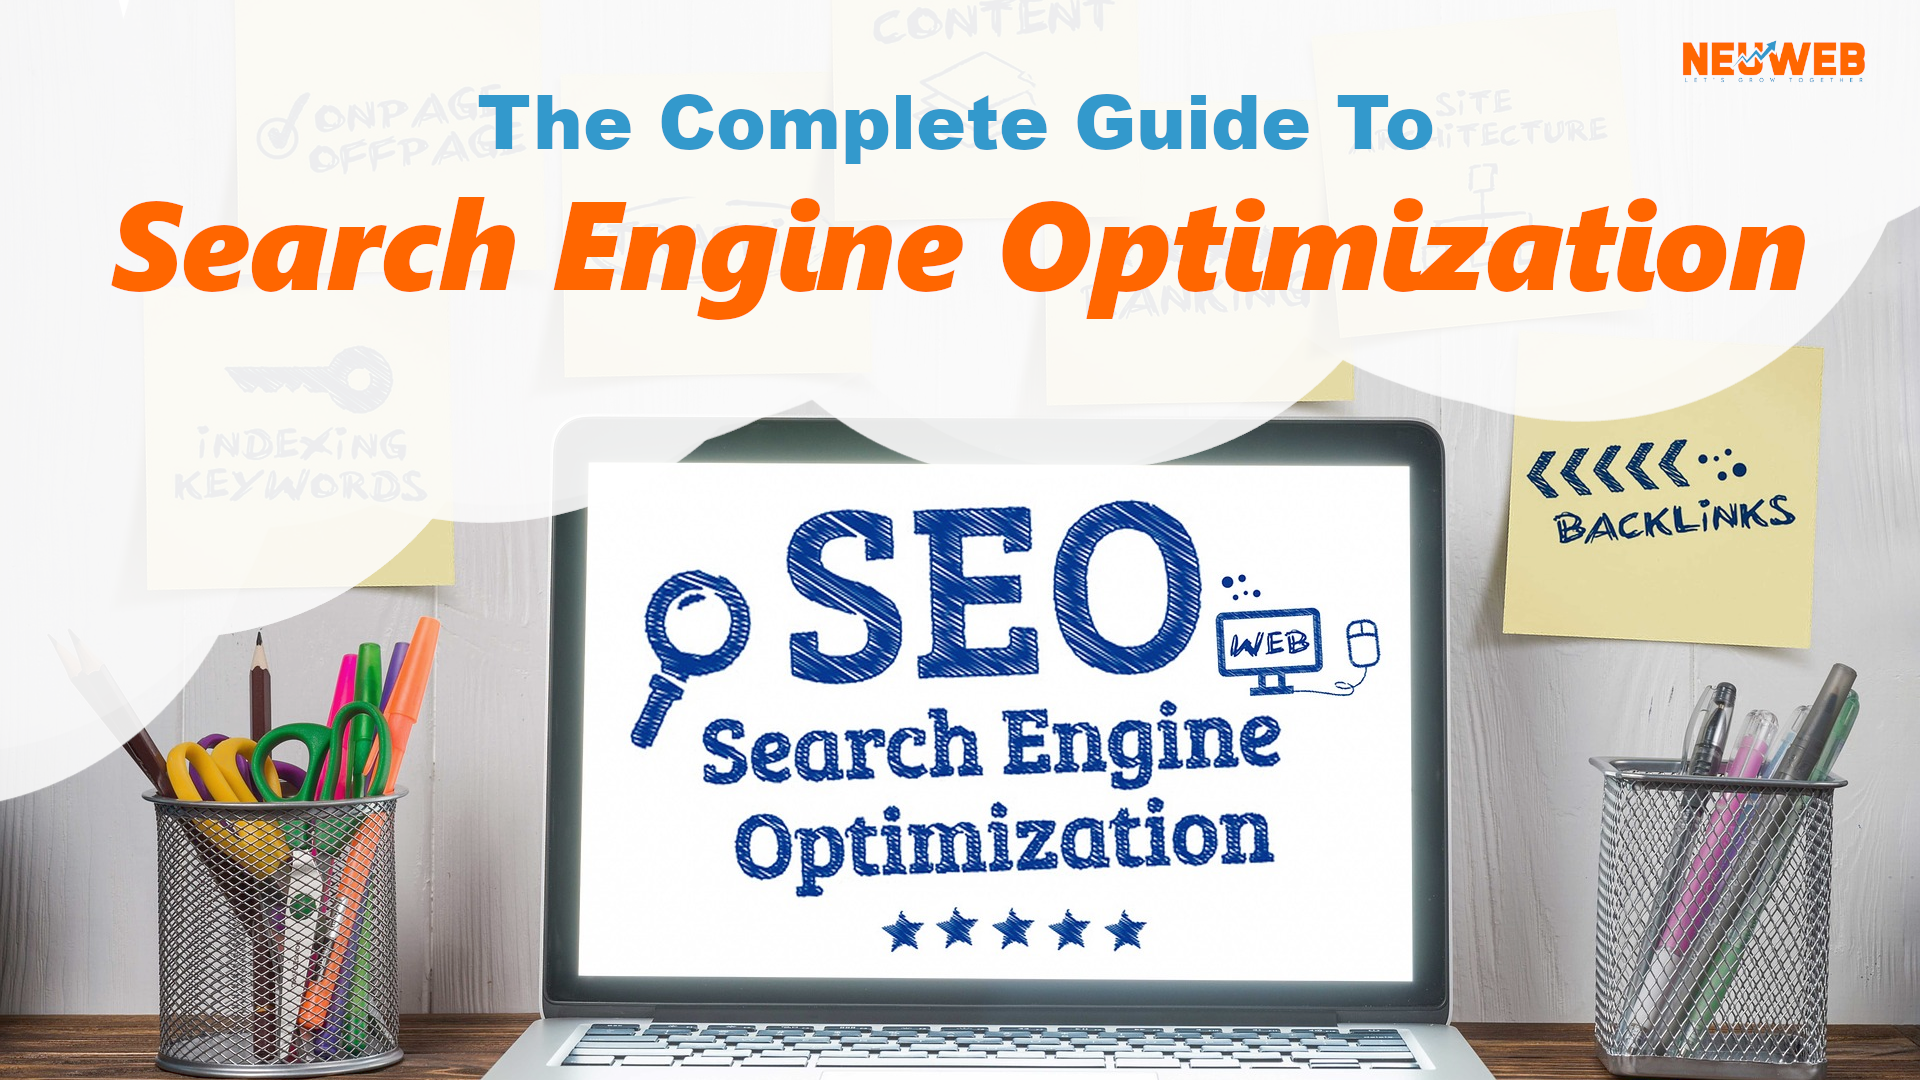 The complete guide to search engine optimization